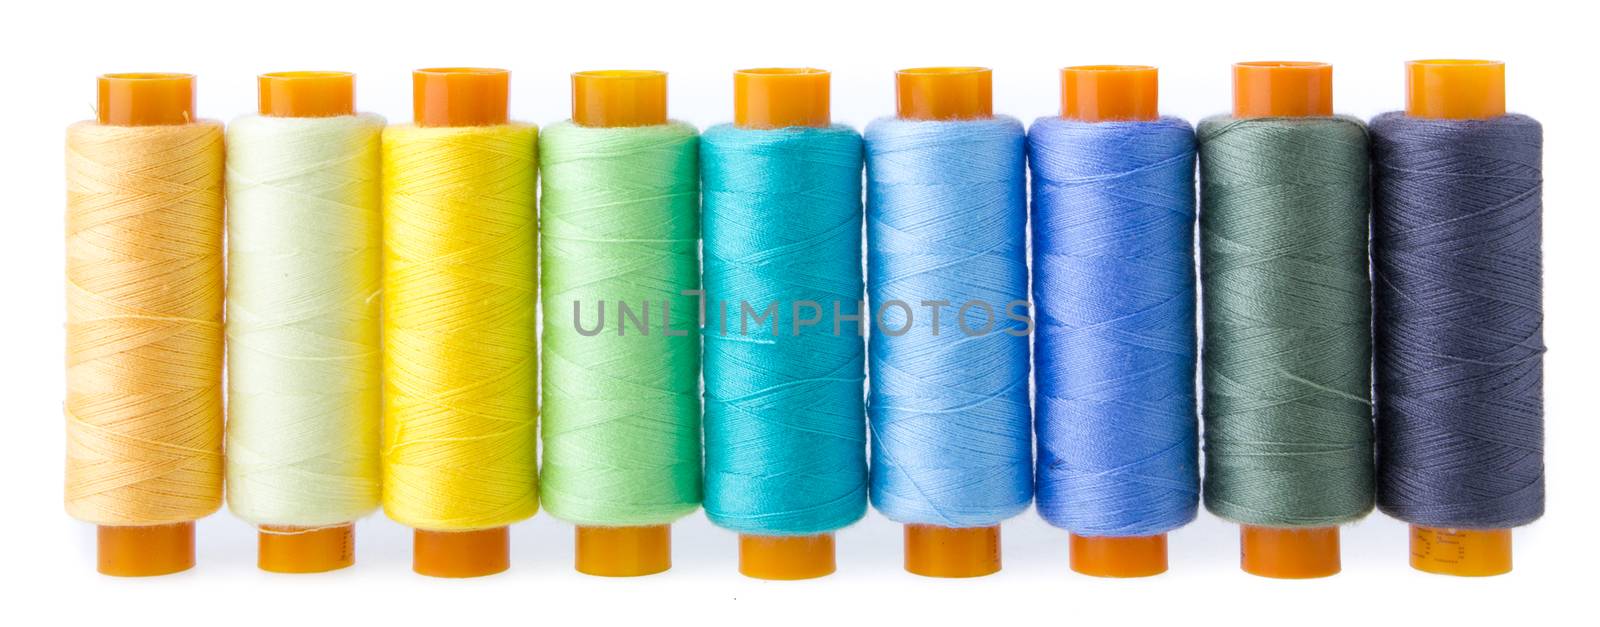 Sewing threads multicolored by tehcheesiong